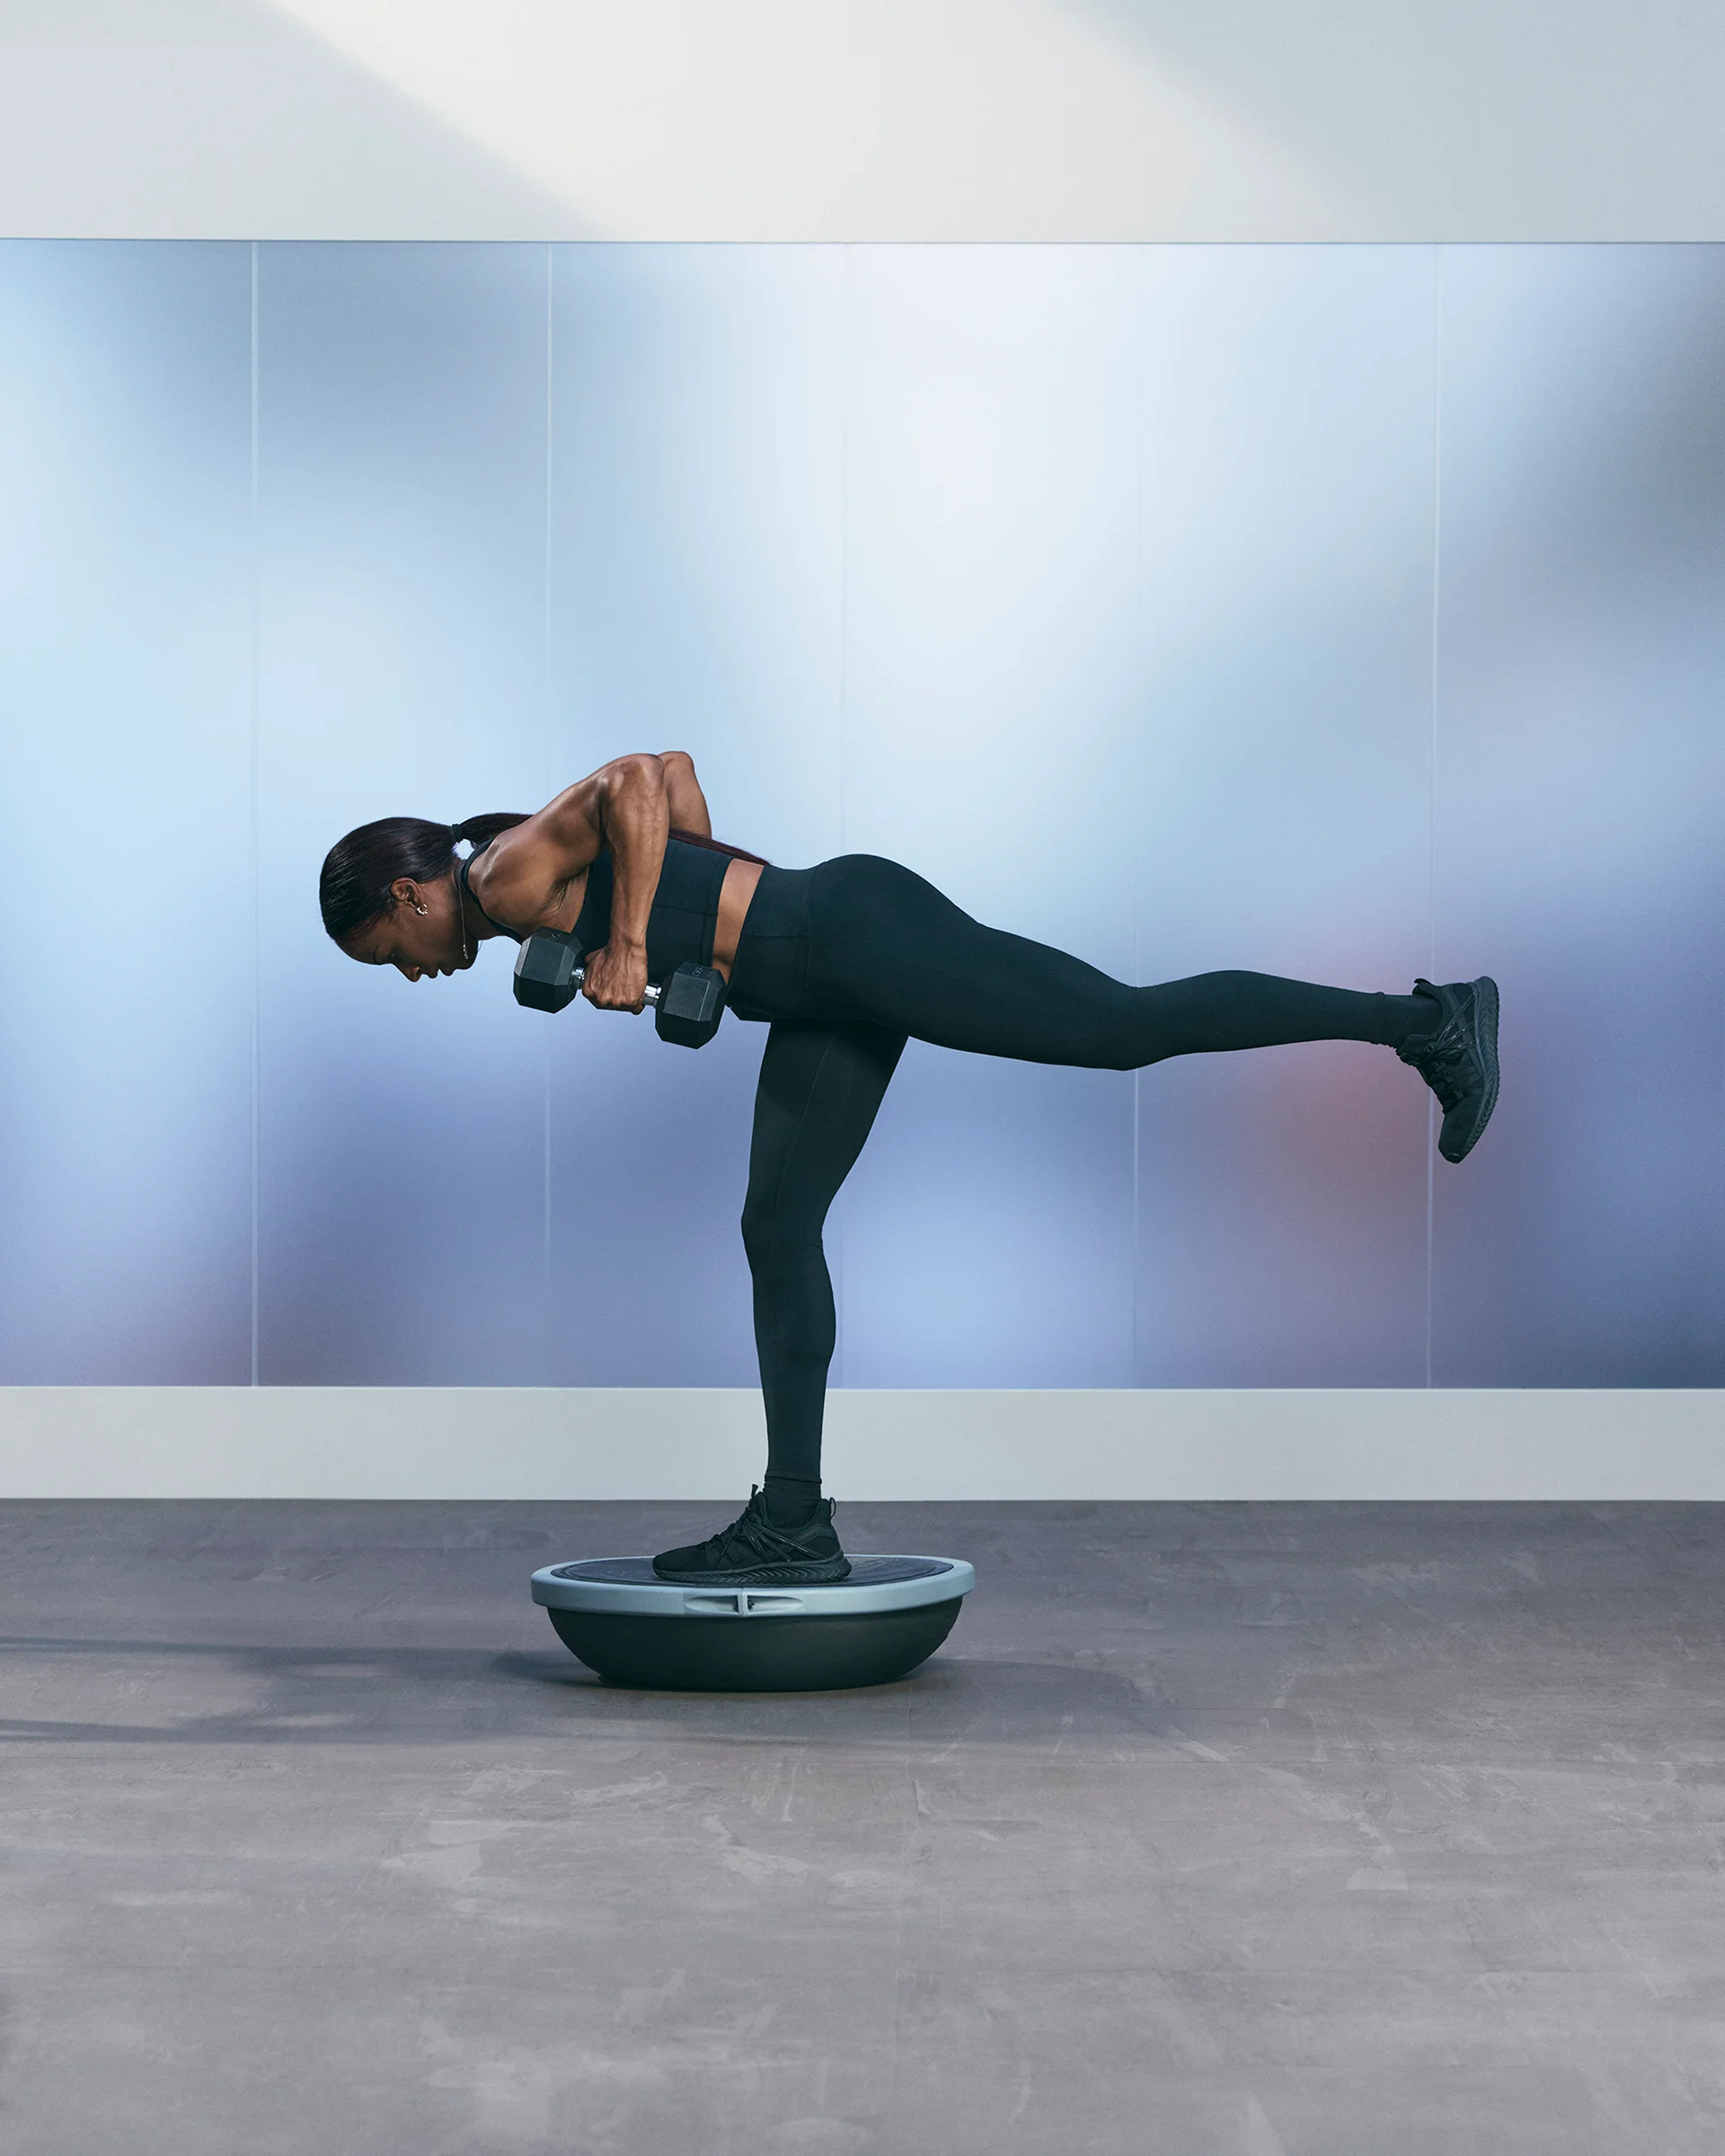 A Life Time member balancing on one leg using a BOSU while holding dumbbells.